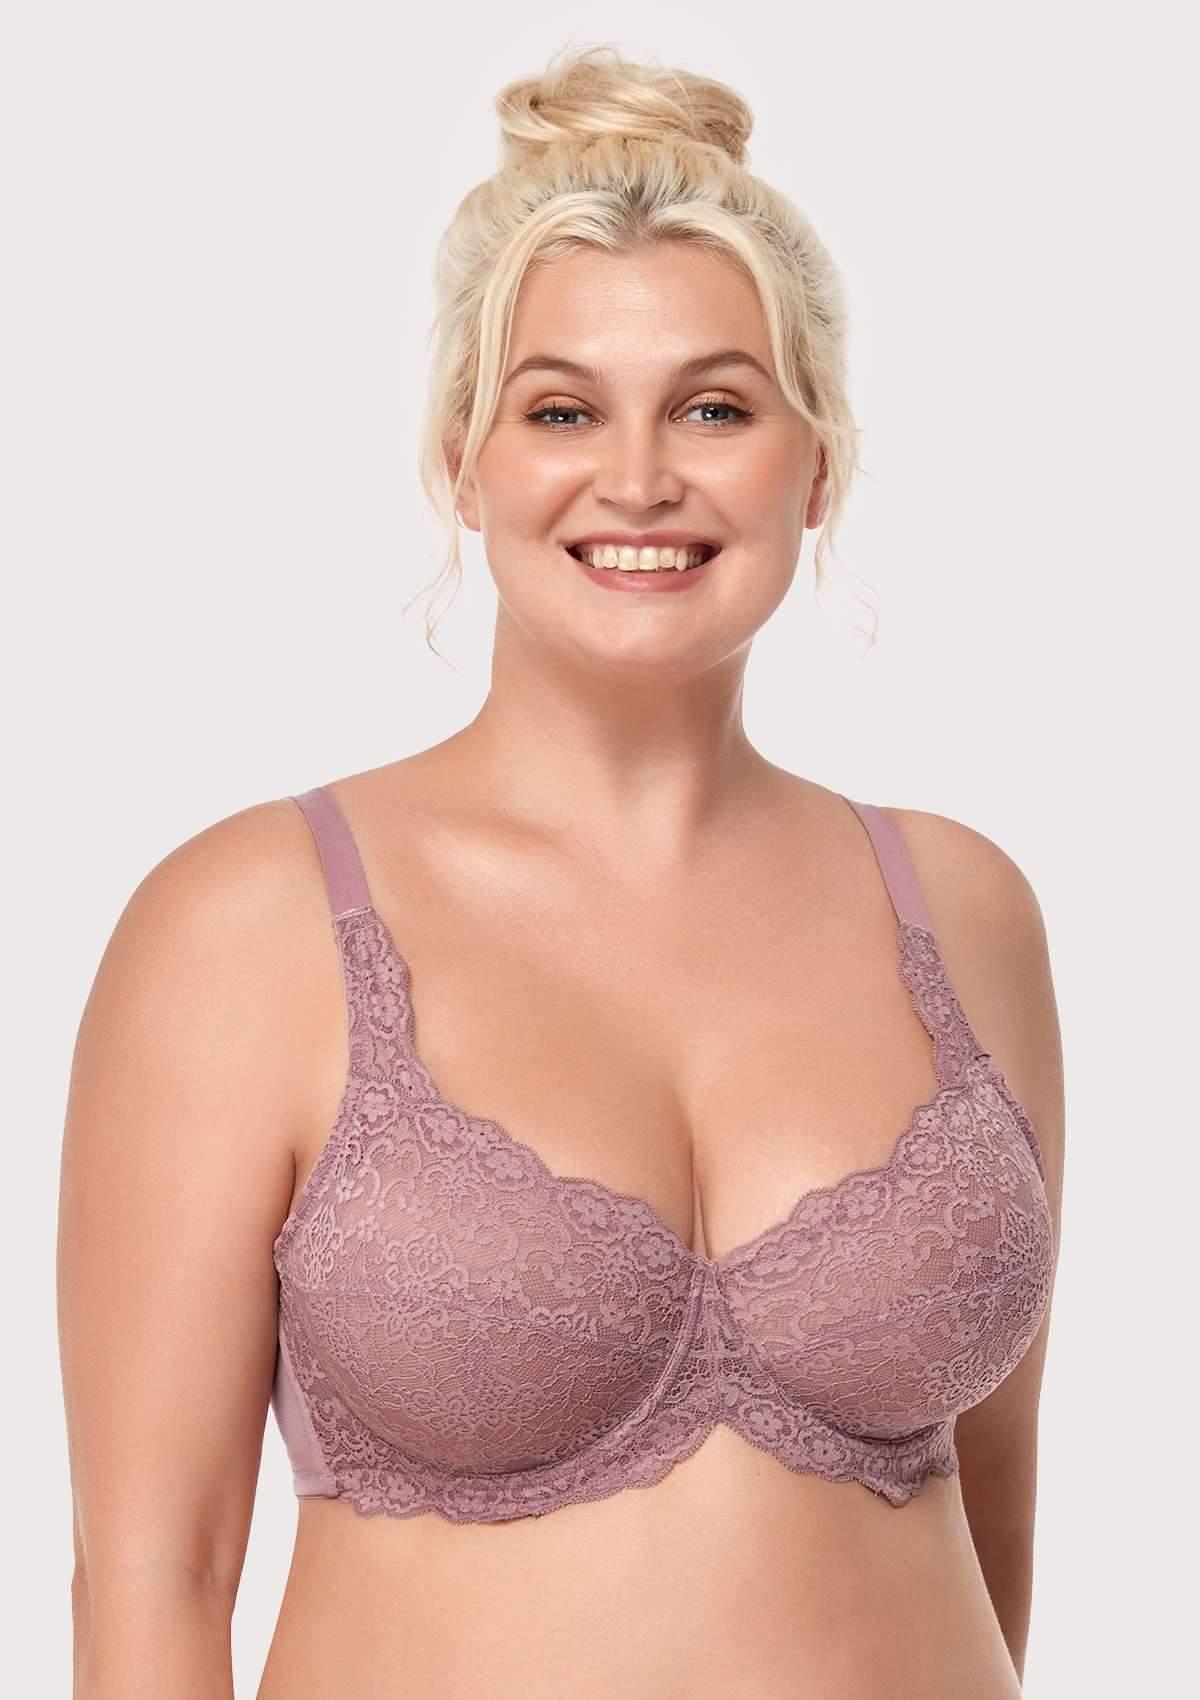 HSIA All-Over Floral Lace Unlined Bra: Minimizer Bra For Heavy Breasts - Purple / 40 / D